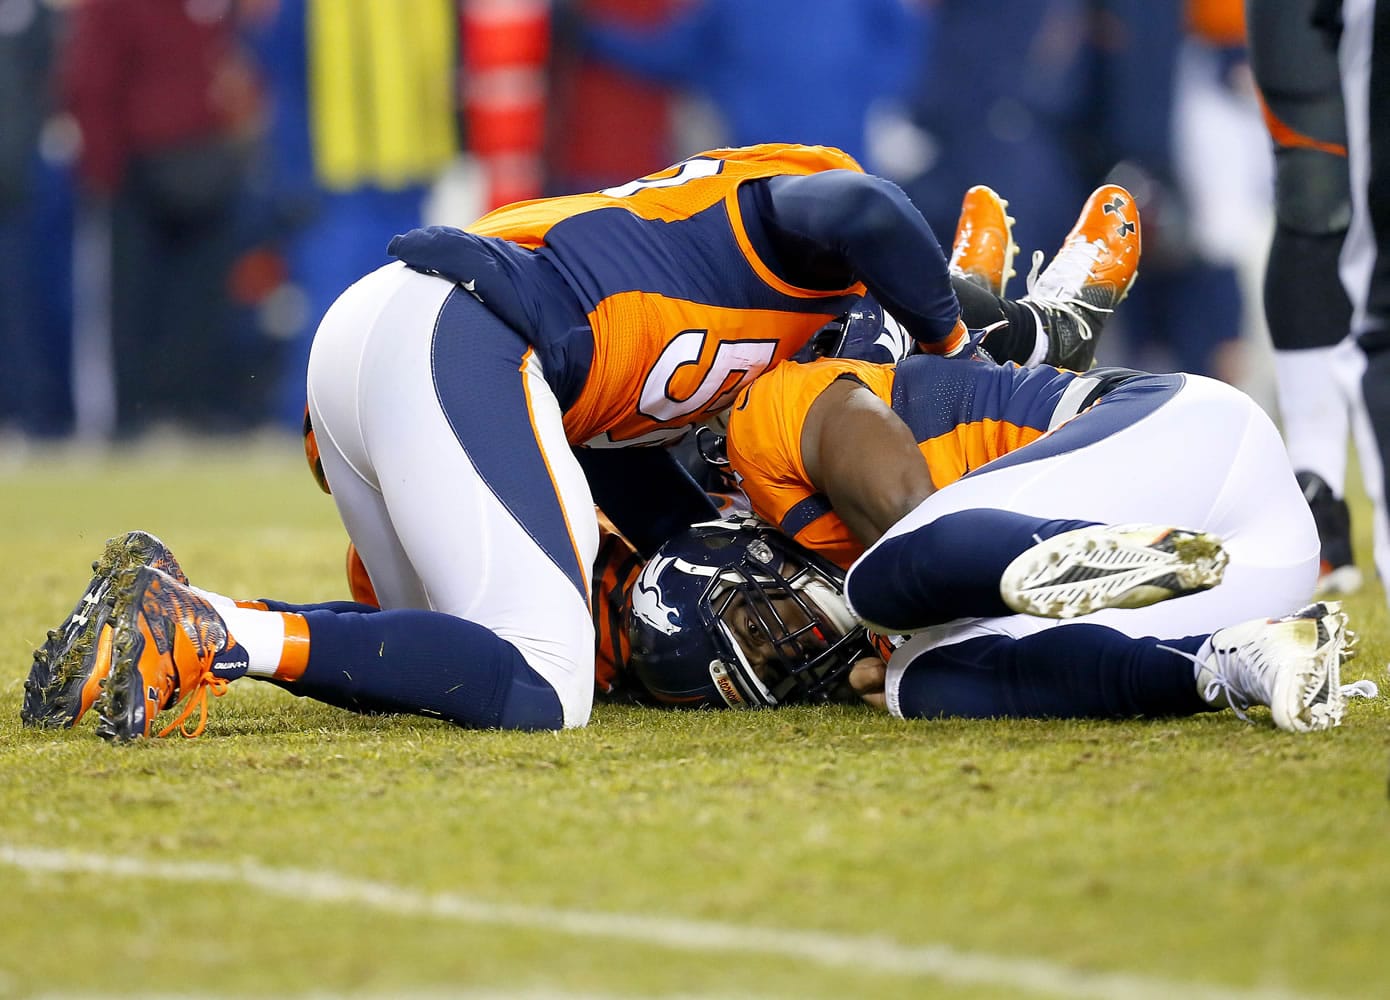 Denver Broncos outside linebacker DeMarcus Ware, right, lies on his fumble recovery for the win after an NFL football game against the Cincinnati Bengals, Monday, Dec. 28, 2015, in Denver. The Broncos won 20-17 in overtime. At left is Denver Broncos inside linebacker Danny Trevathan.